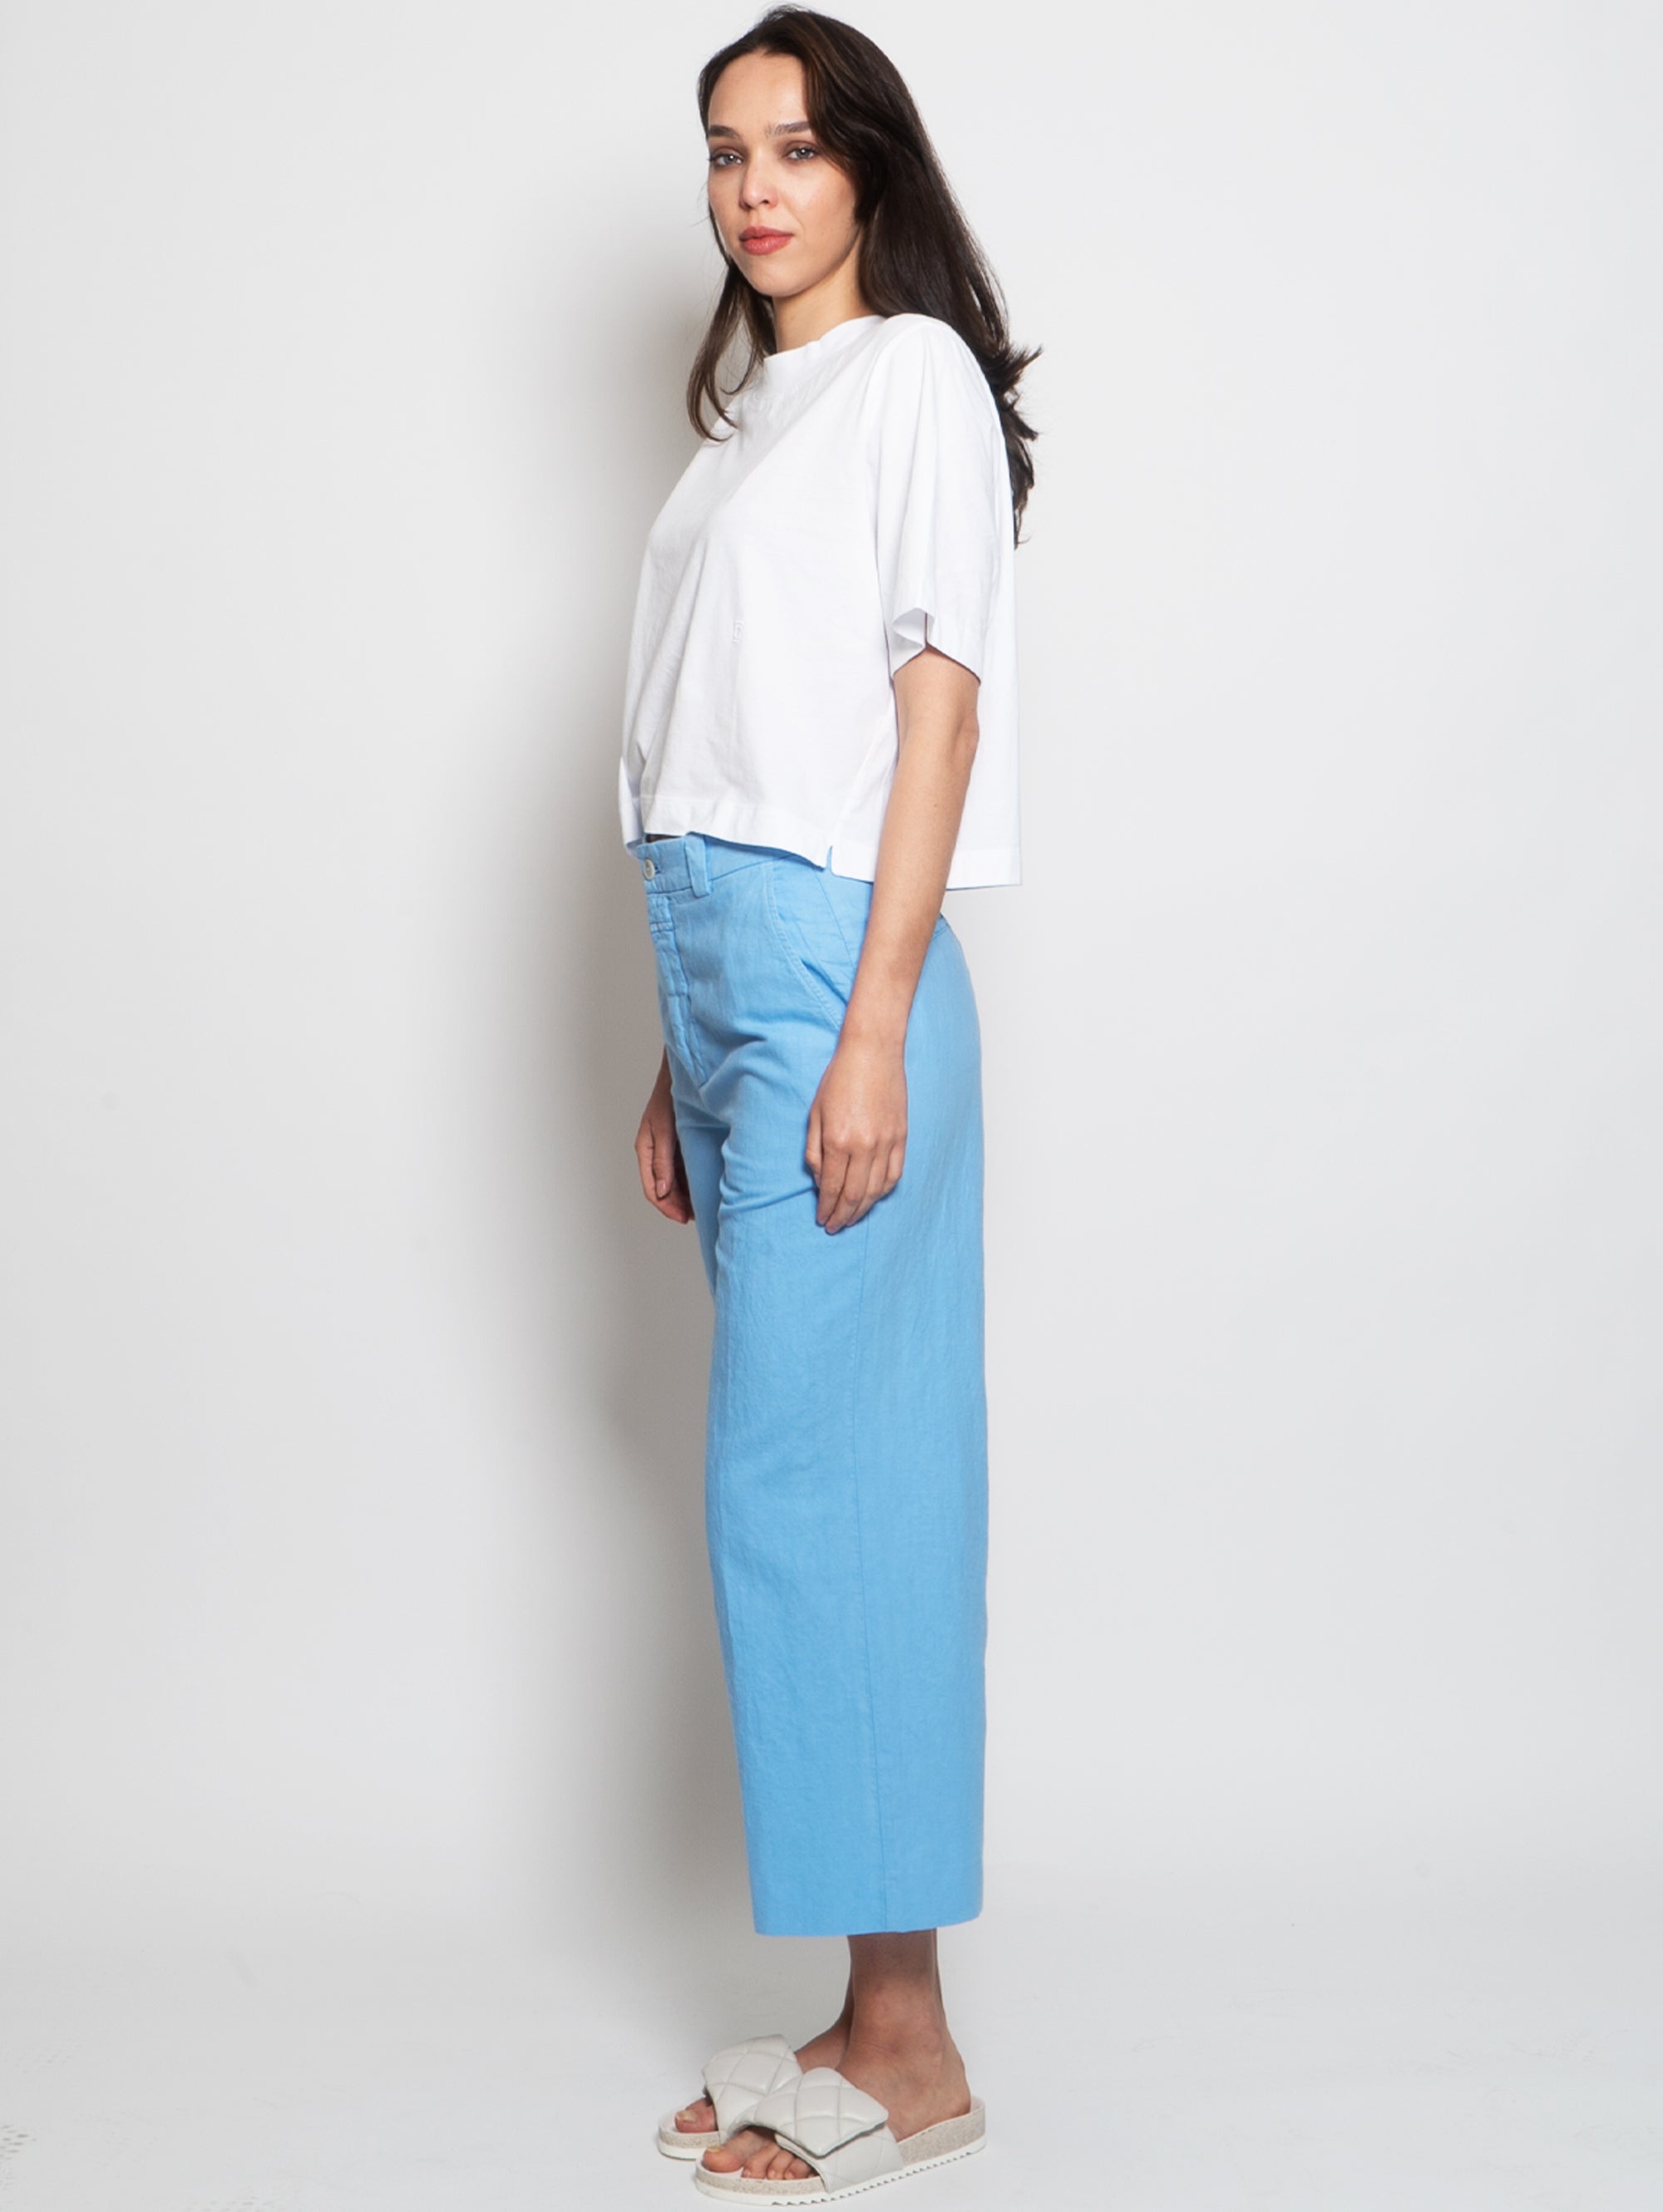 Light blue linen and cotton trousers